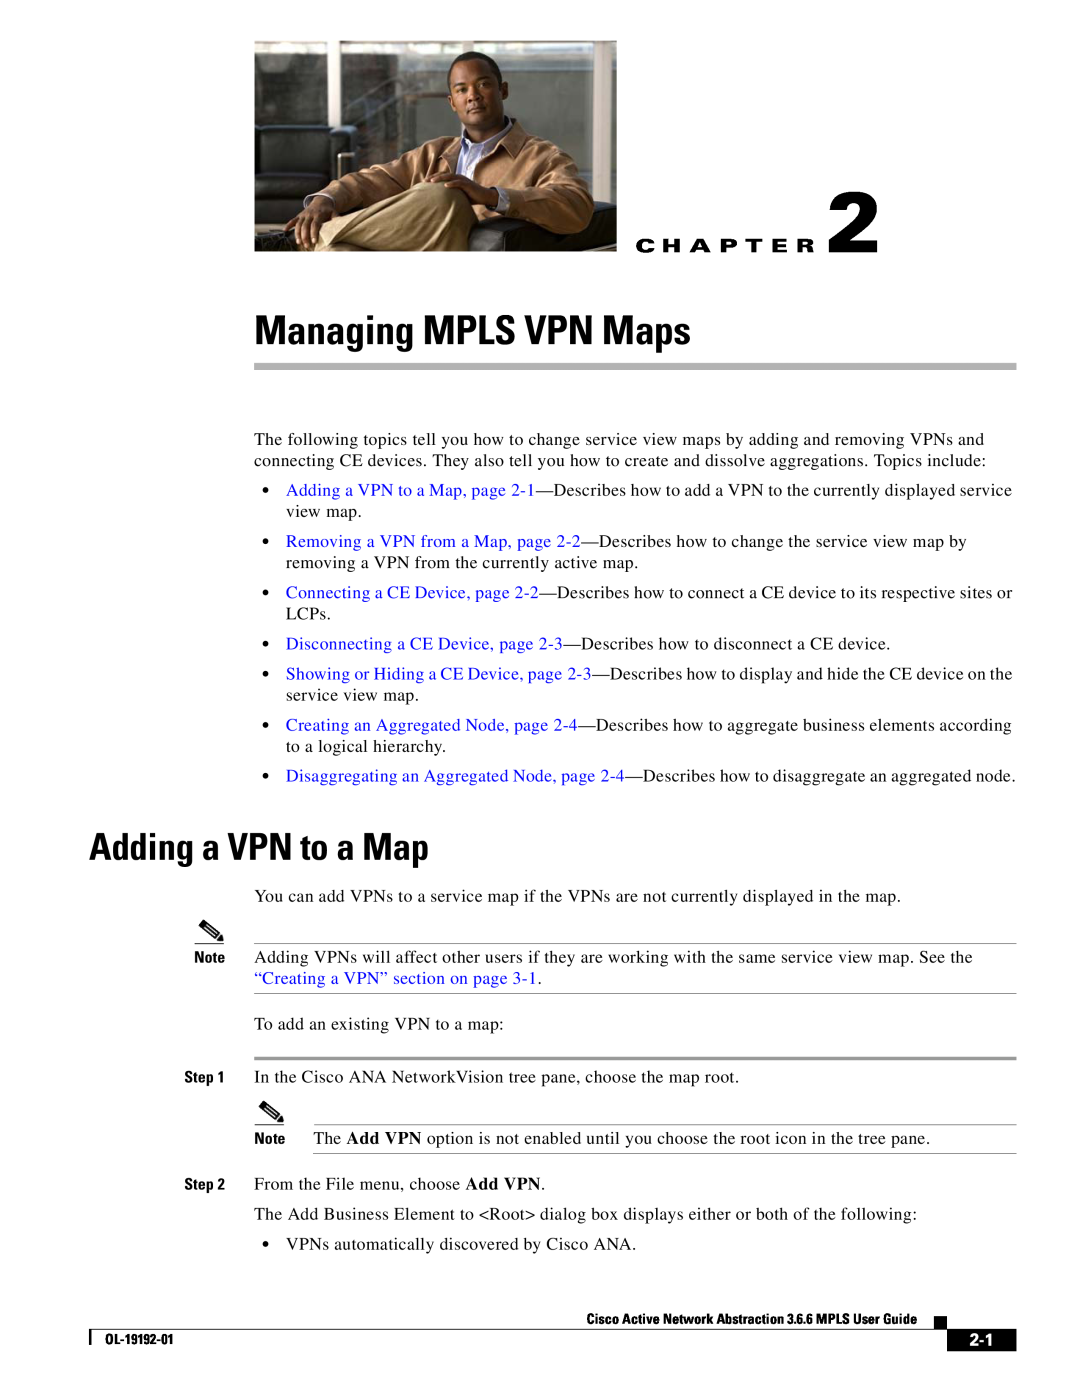 Cisco Systems 3.6.6 manual Managing MPLS VPN Maps, Adding a VPN to a Map, C H A P T E R 